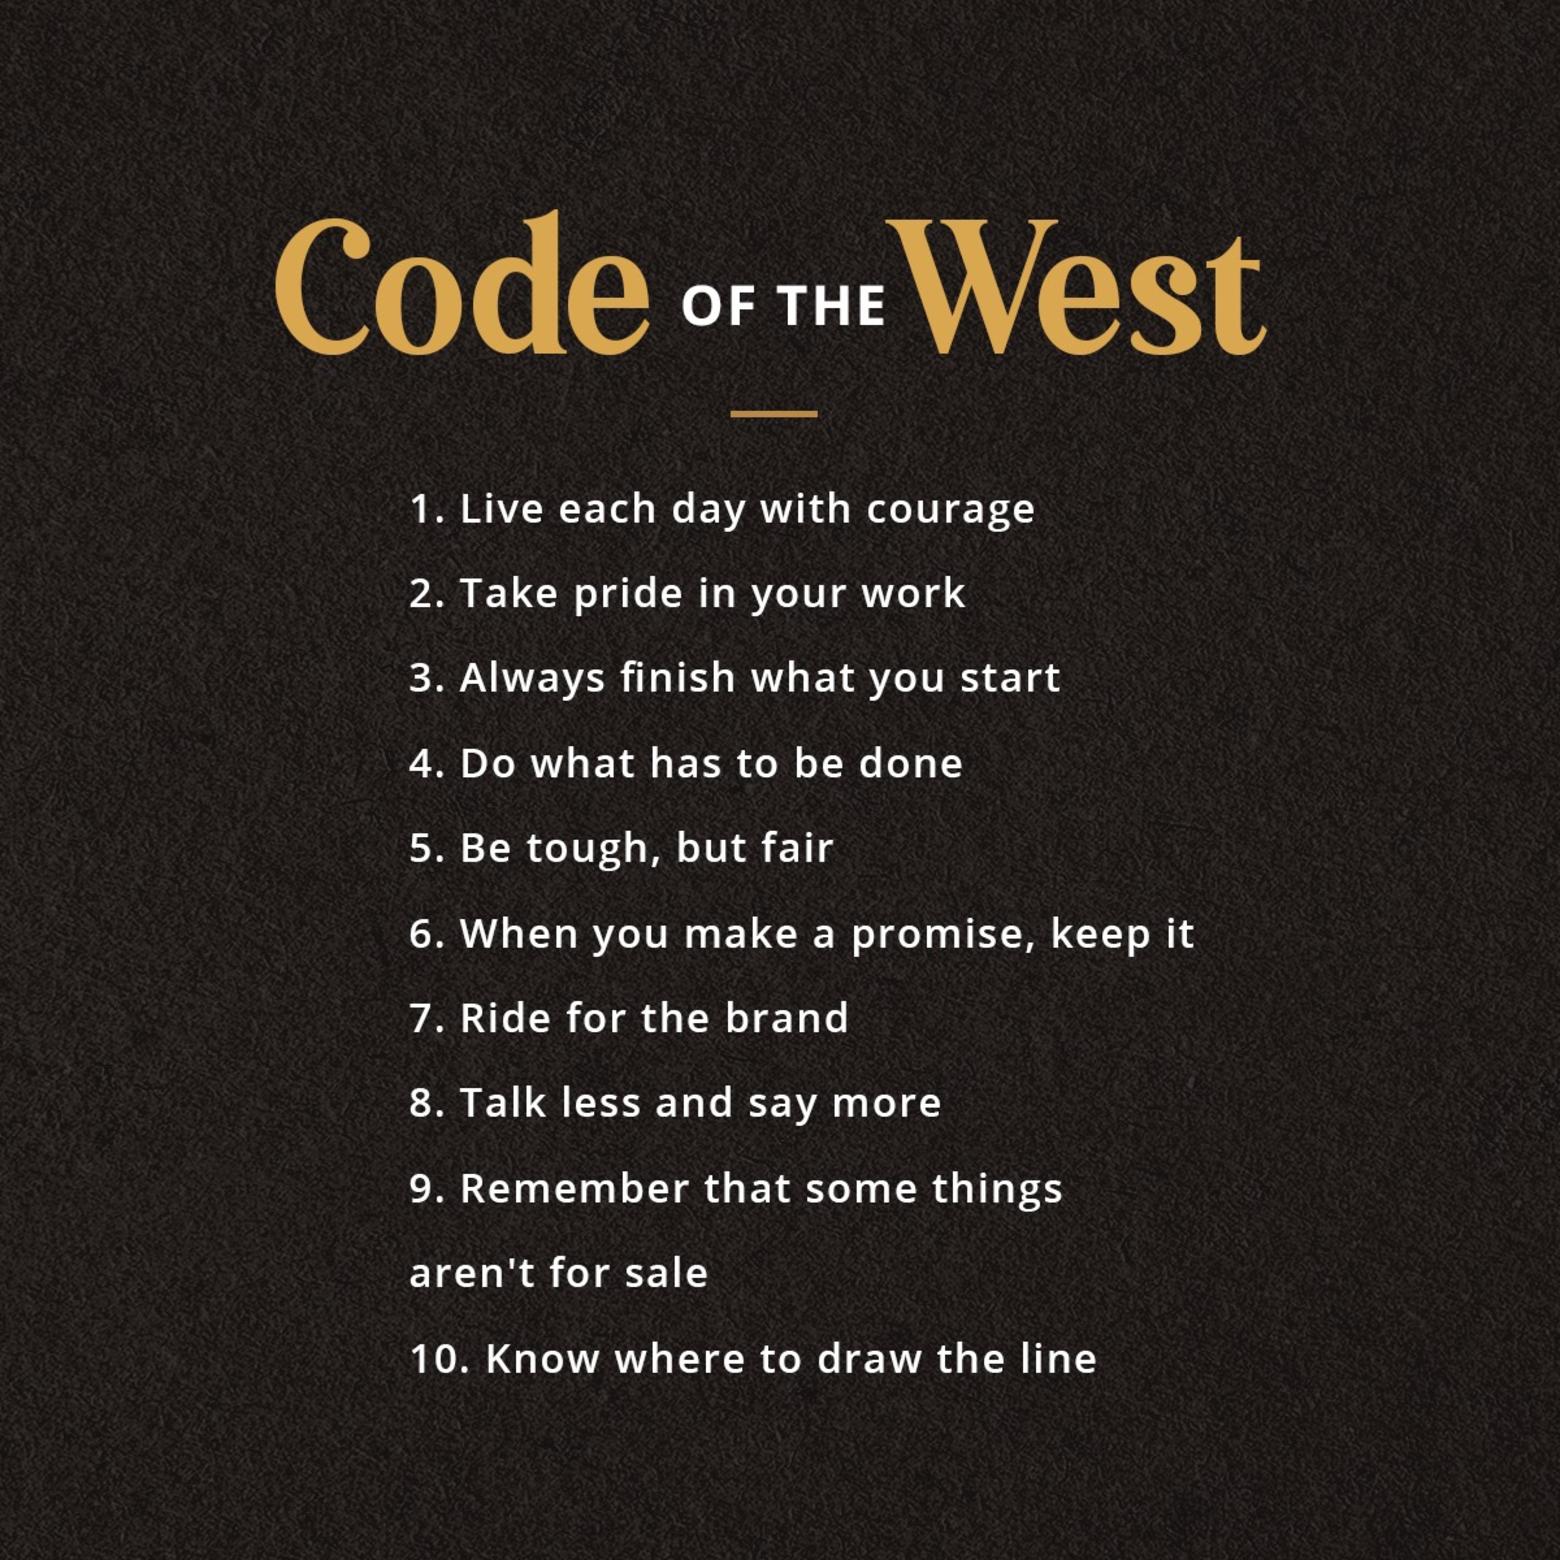 Not long ago, US Rep. Liz Cheney shared this graphic of the "Code of the West" on her Facebook page, which is said to espouse principles and values in the heart of every good Westerner.  Was she sending a message to members of the GOP in Wyoming and back in DC?